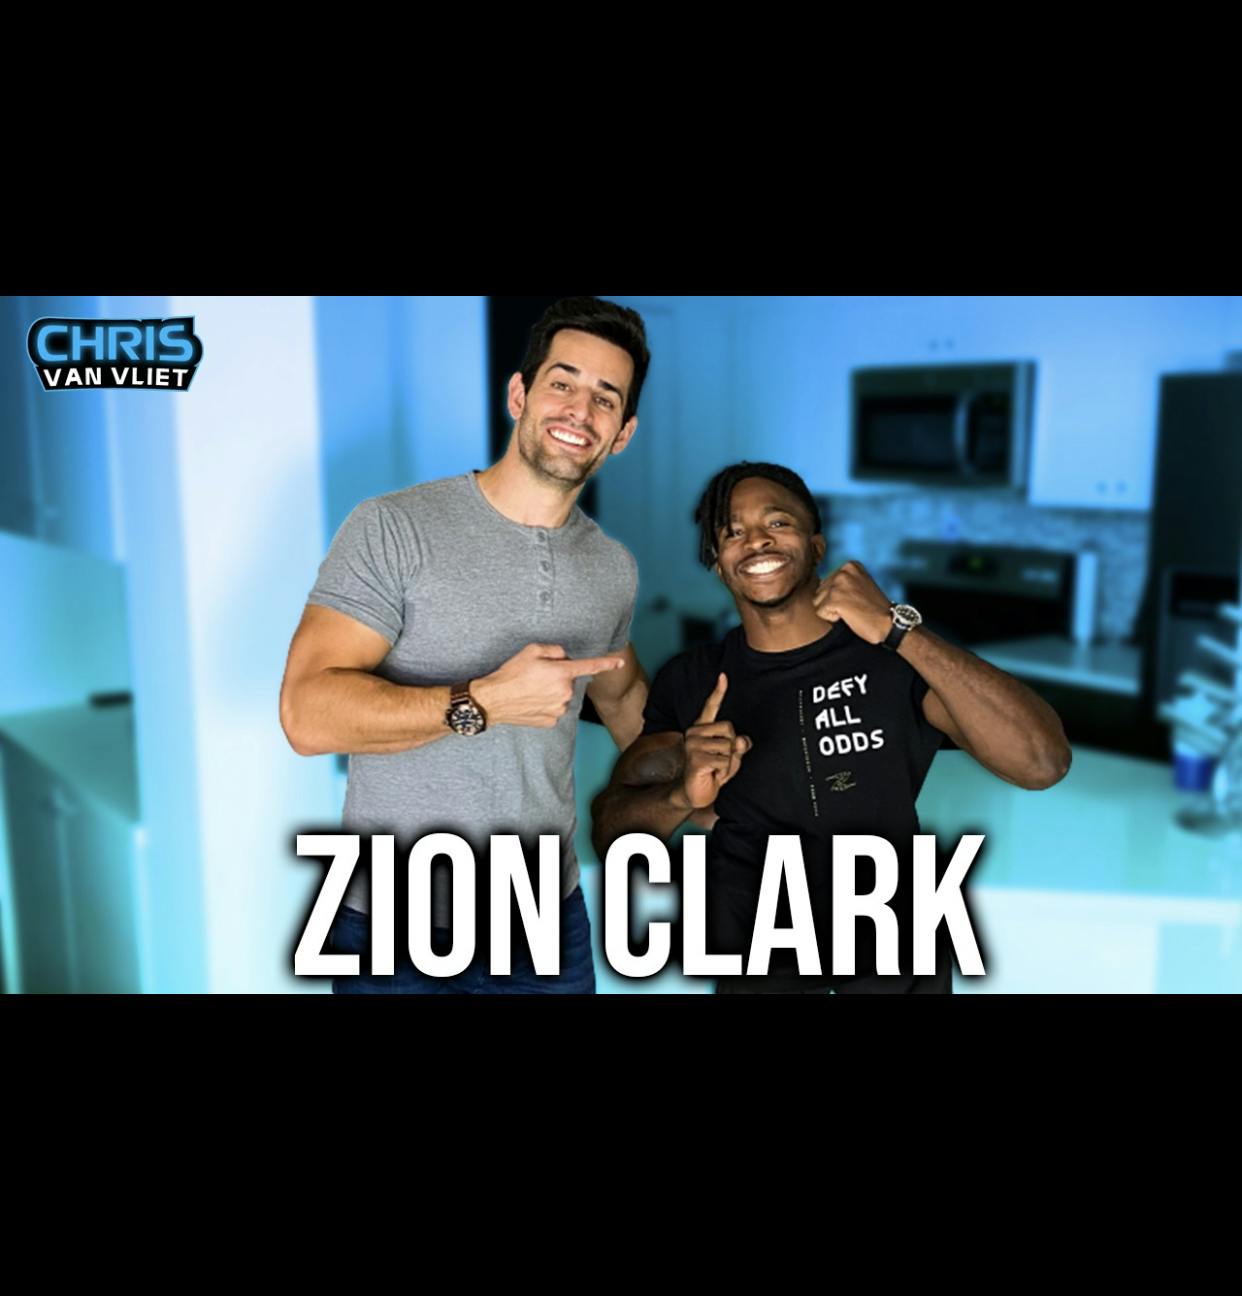 Zion Clark - The Inspiring Story of the Wrestler Born Without Legs